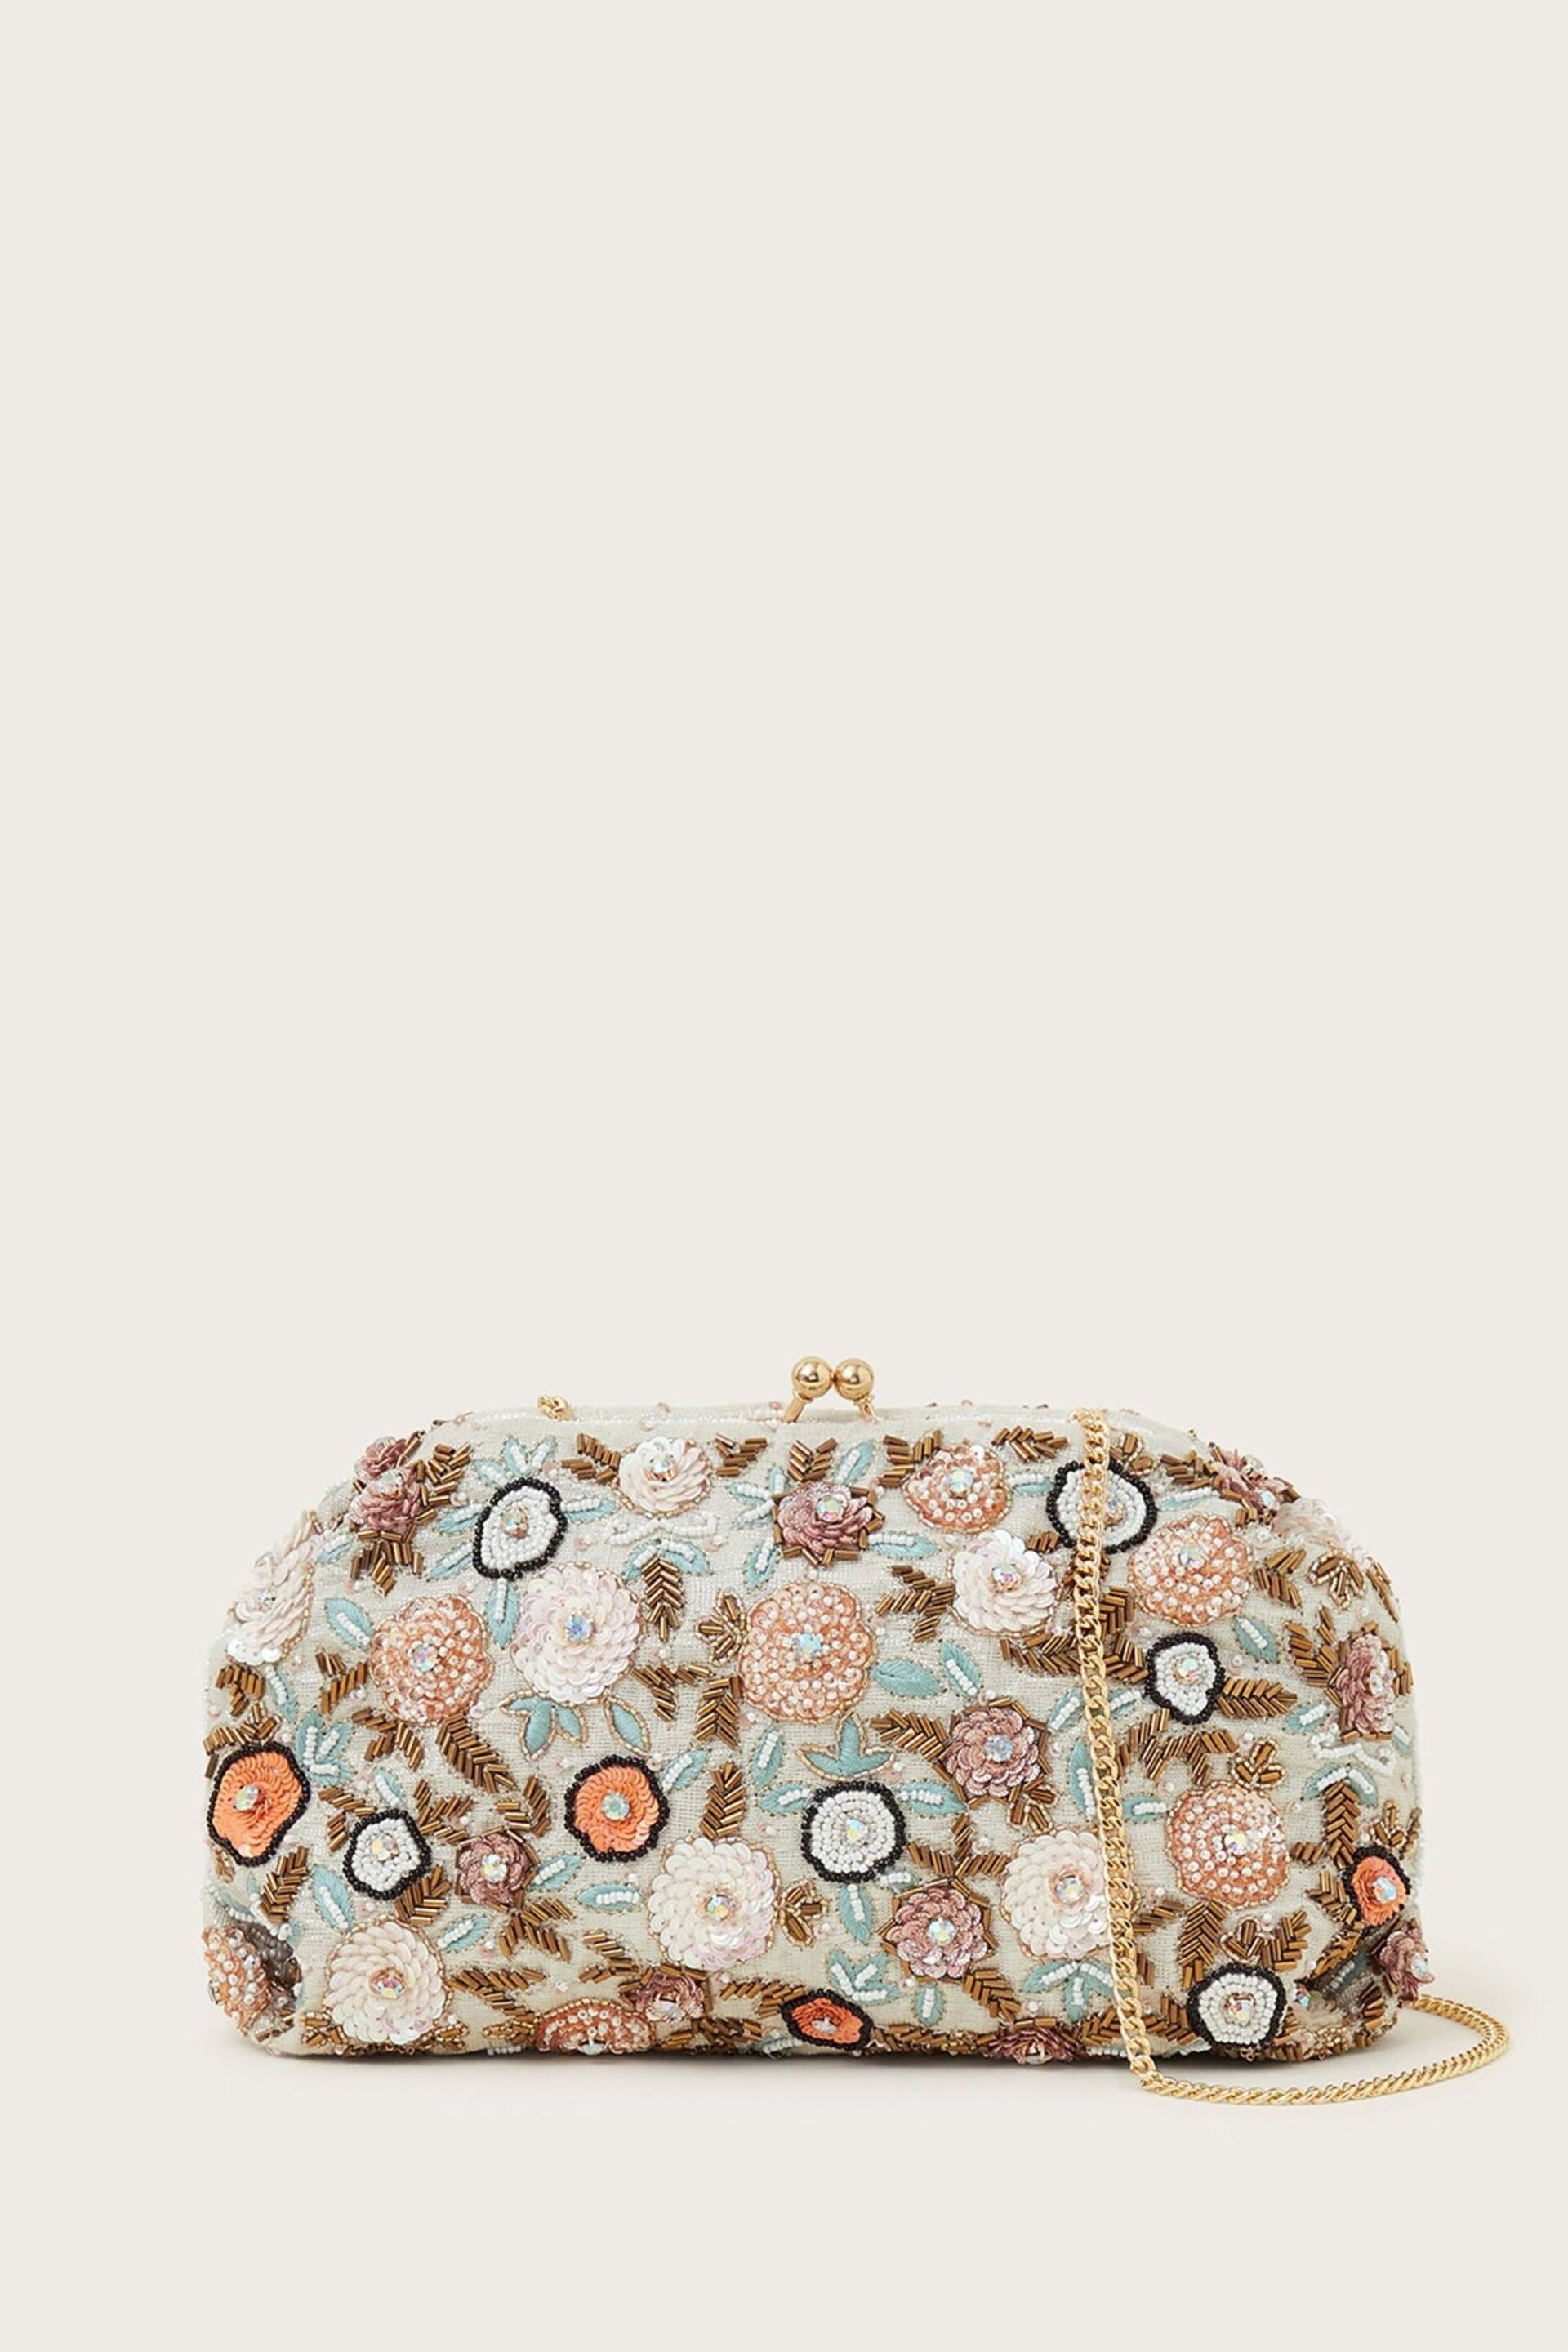 Monsoon Multi Pastel Floral Clutch - Image 1 of 3